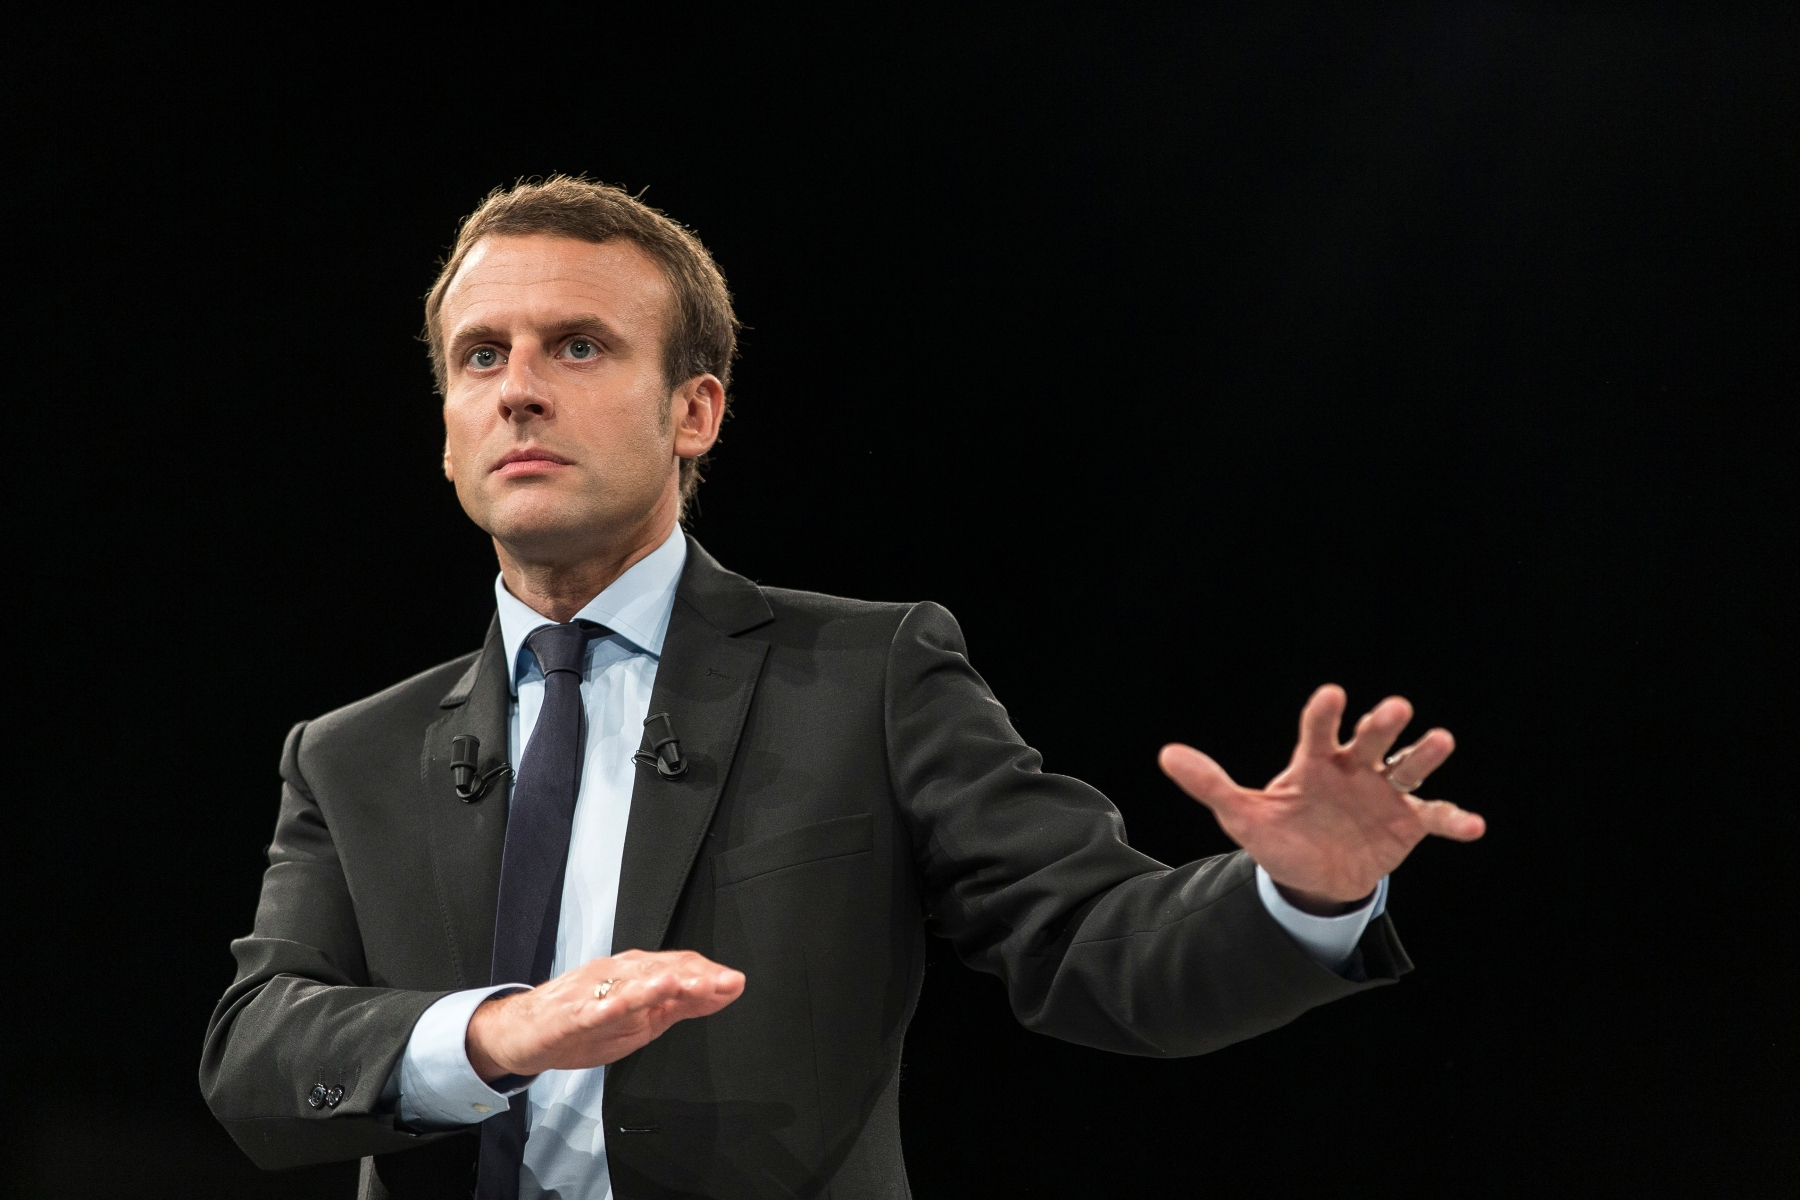 In this photo dated Tuesday, Oct. 4, 2016 former French Economy Minister and potential French presidential contender Emmanuel Macron gestures as he delivers his speech during a political rally in Strasbourg, eastern France. Macron is the founder of a political movement called "En Marche" (On the Move). (AP Photo/Jean-Francois Badias) France Presidential Race